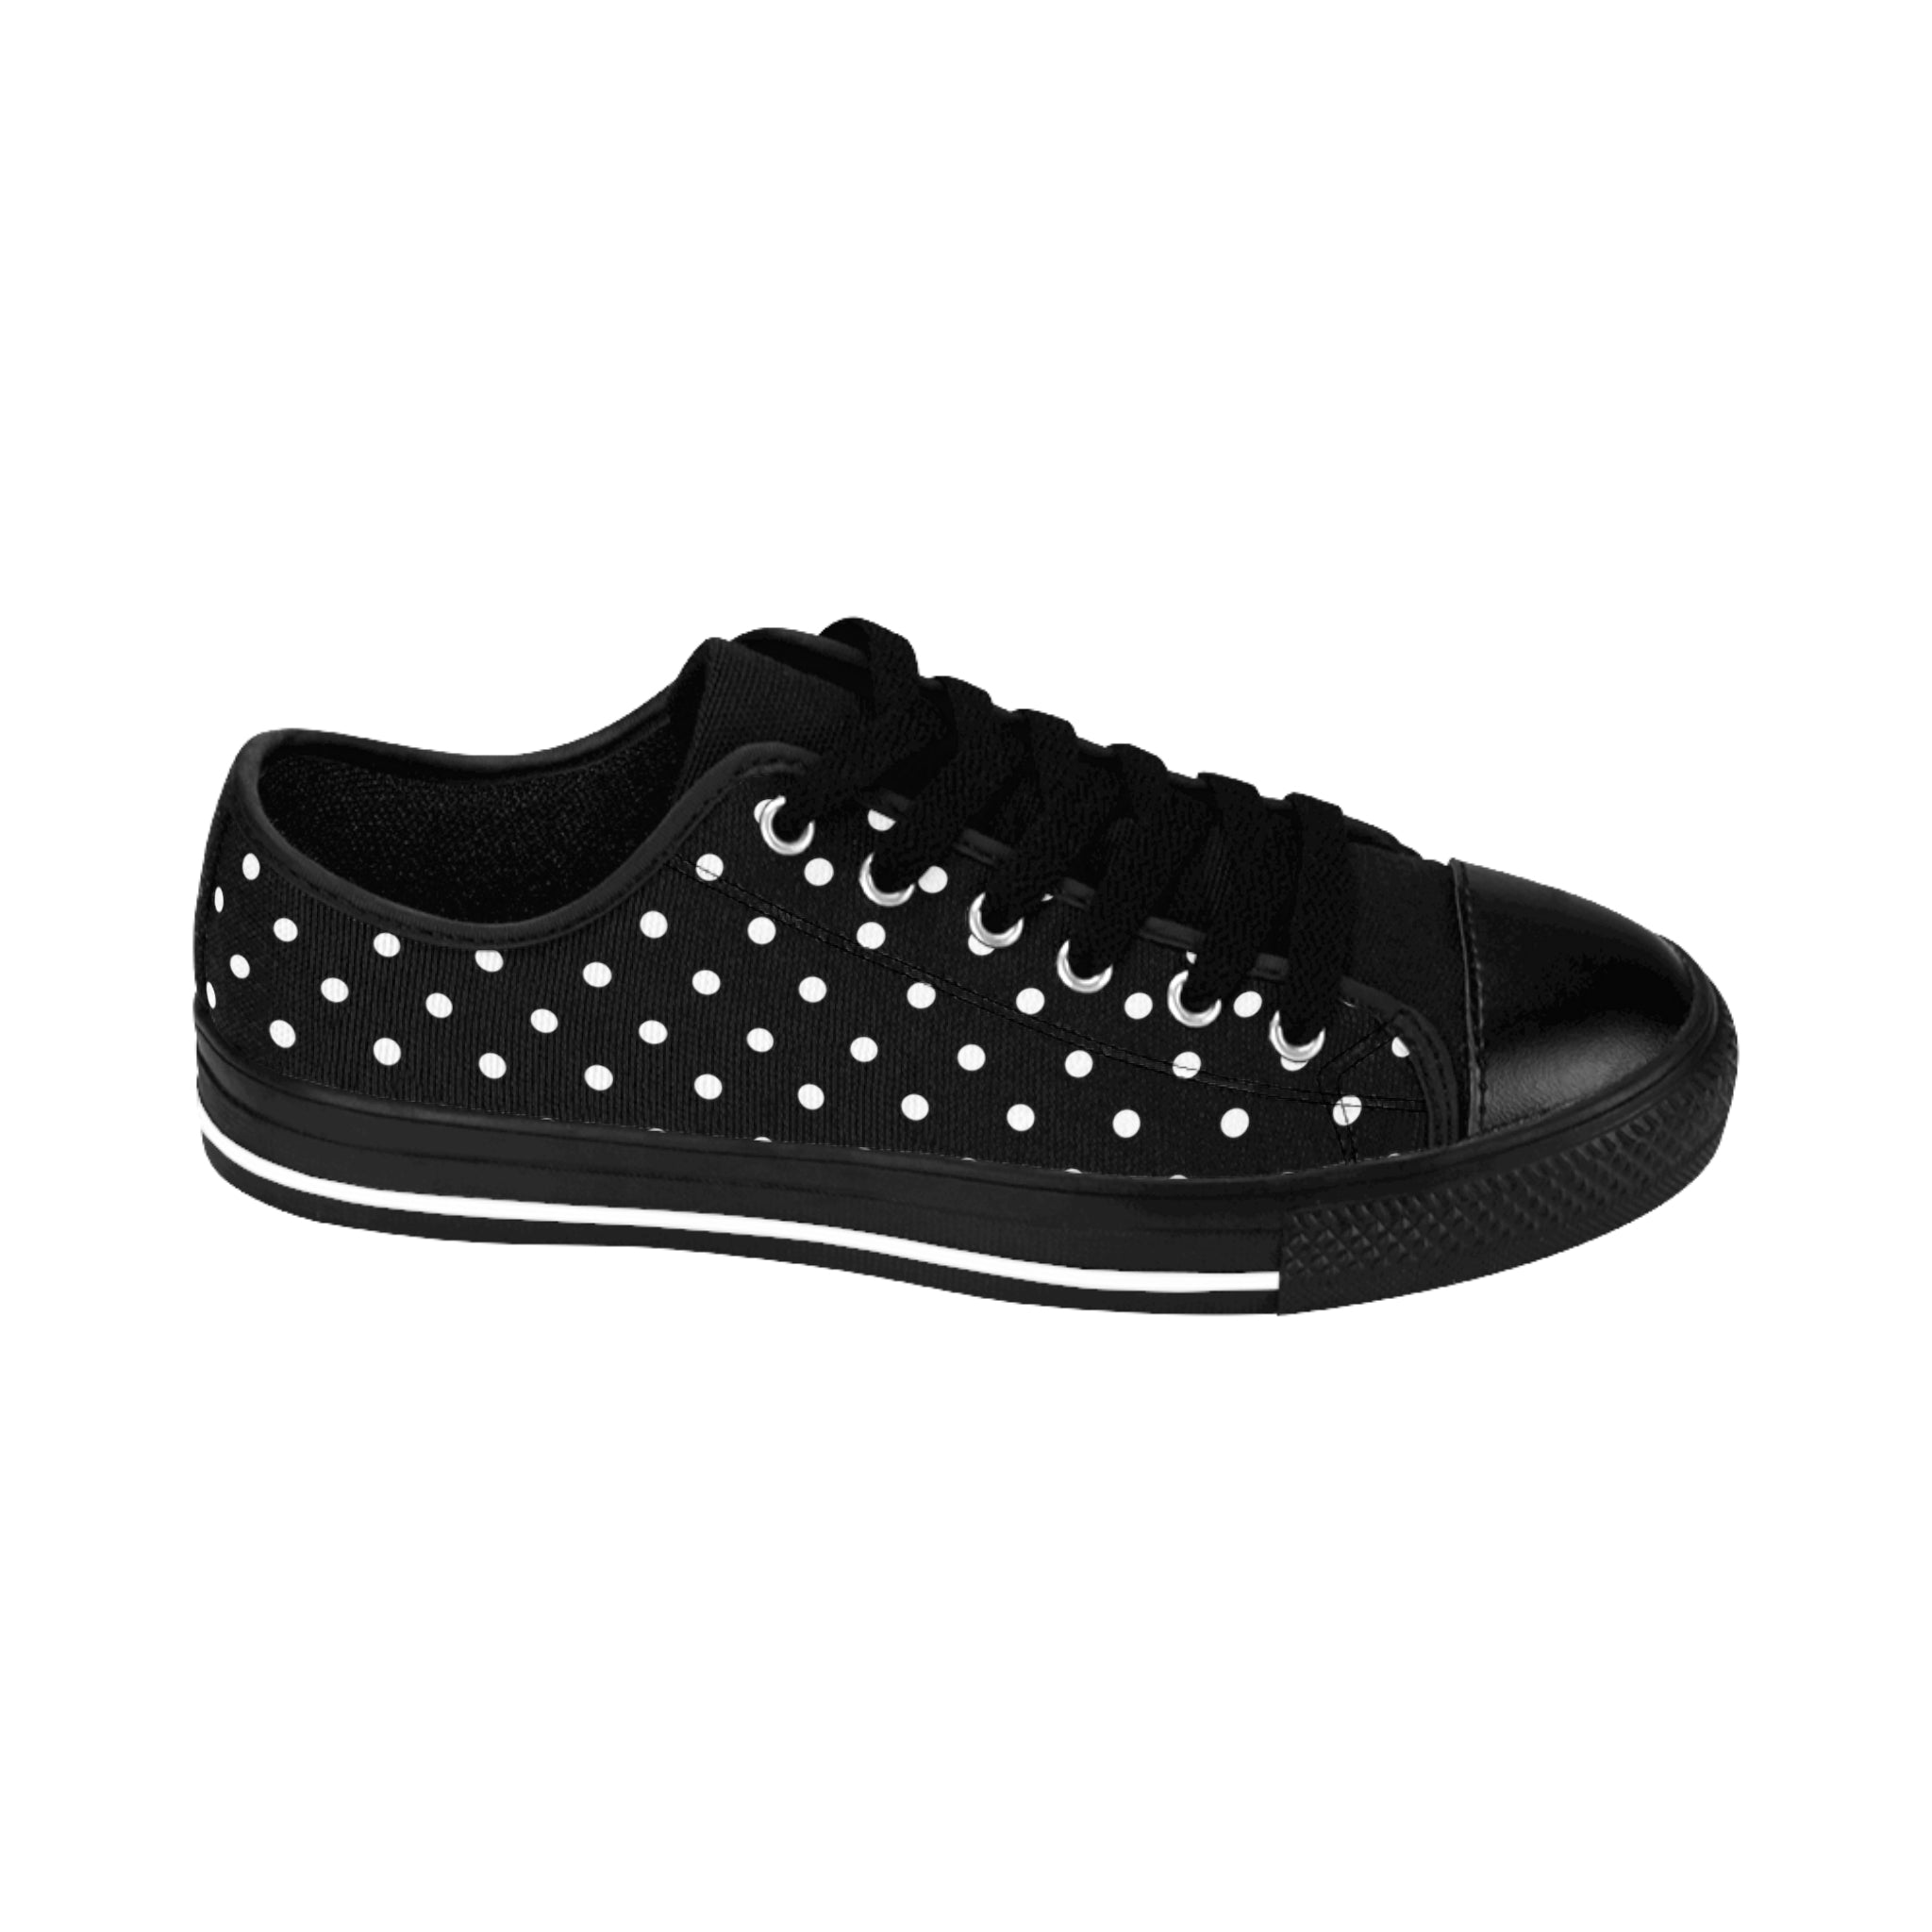 Polka Dots For days (Pattern in White) Black Women's Low Top Canvas Shoes Shoes US-9-Black-sole The Middle Aged Groove